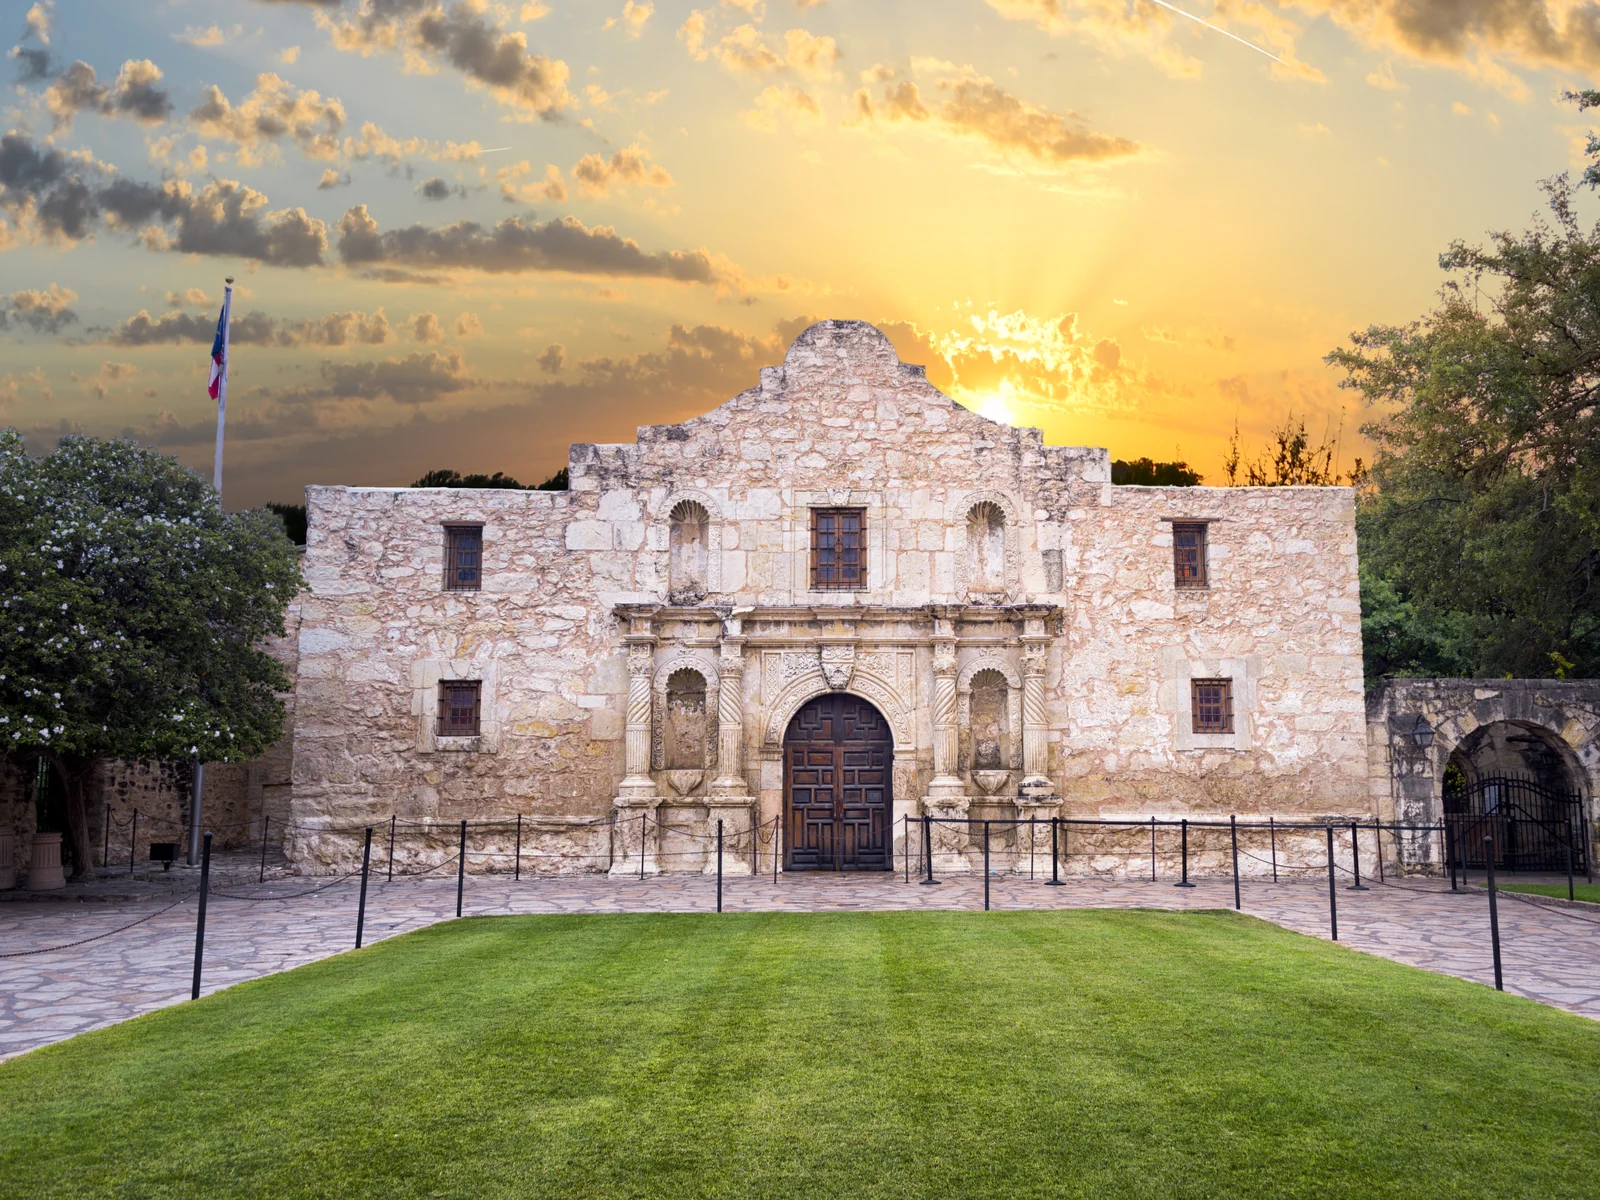 The Alamo, one of the absolute best things to do in San Antonio, pictured at dusk